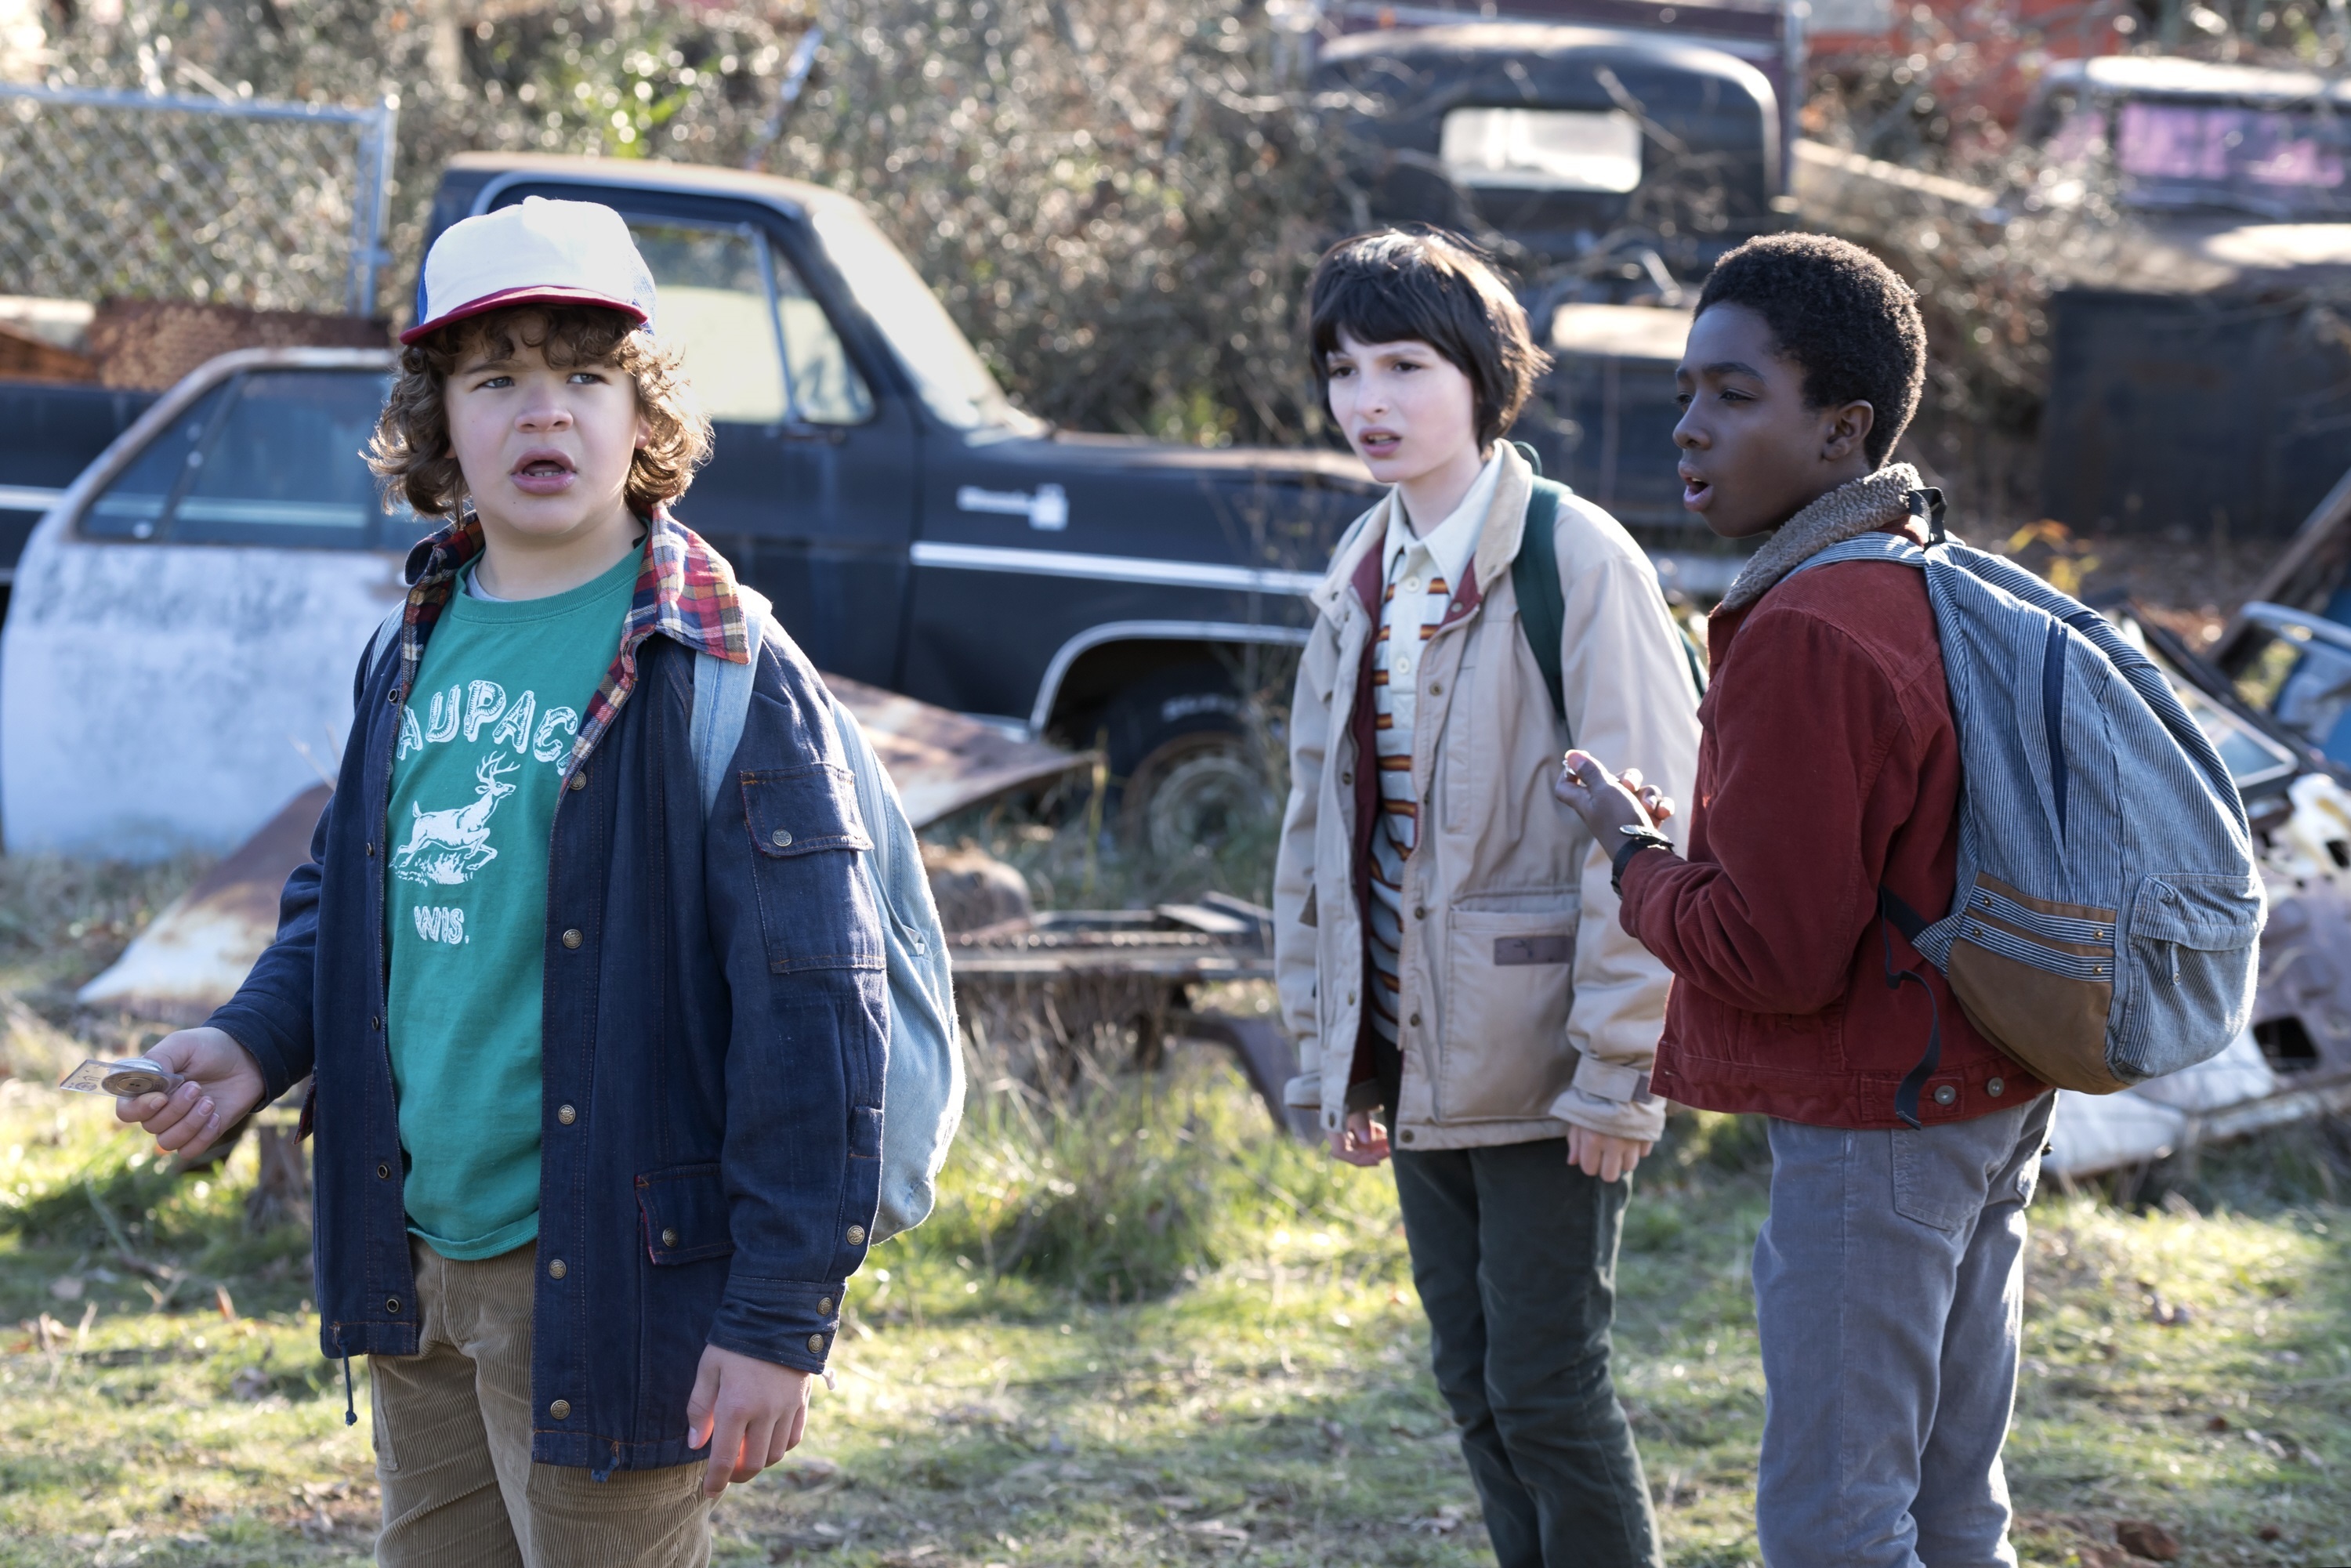 <p>Sometimes the hype is well-deserved and that's absolutely the case with the Netflix original series "Stranger Things," which stars a fresh-faced cast of child actors including (from left) Gaten Matarazzo, Finn Wolfhard and Caleb McLaughlin. The premise of this dramatic thriller is complicated, but it involves a terrifying land called The Upside Down, the 1980s, children who've disappeared and a telekinetic little girl named Eleven (played by the brilliant Millie Bobby Brown). Word of warning -- don't watch this show alone. Or with the lights out. The show's fourth season dropped in 2022 and a fifth and final season is on the way.</p>